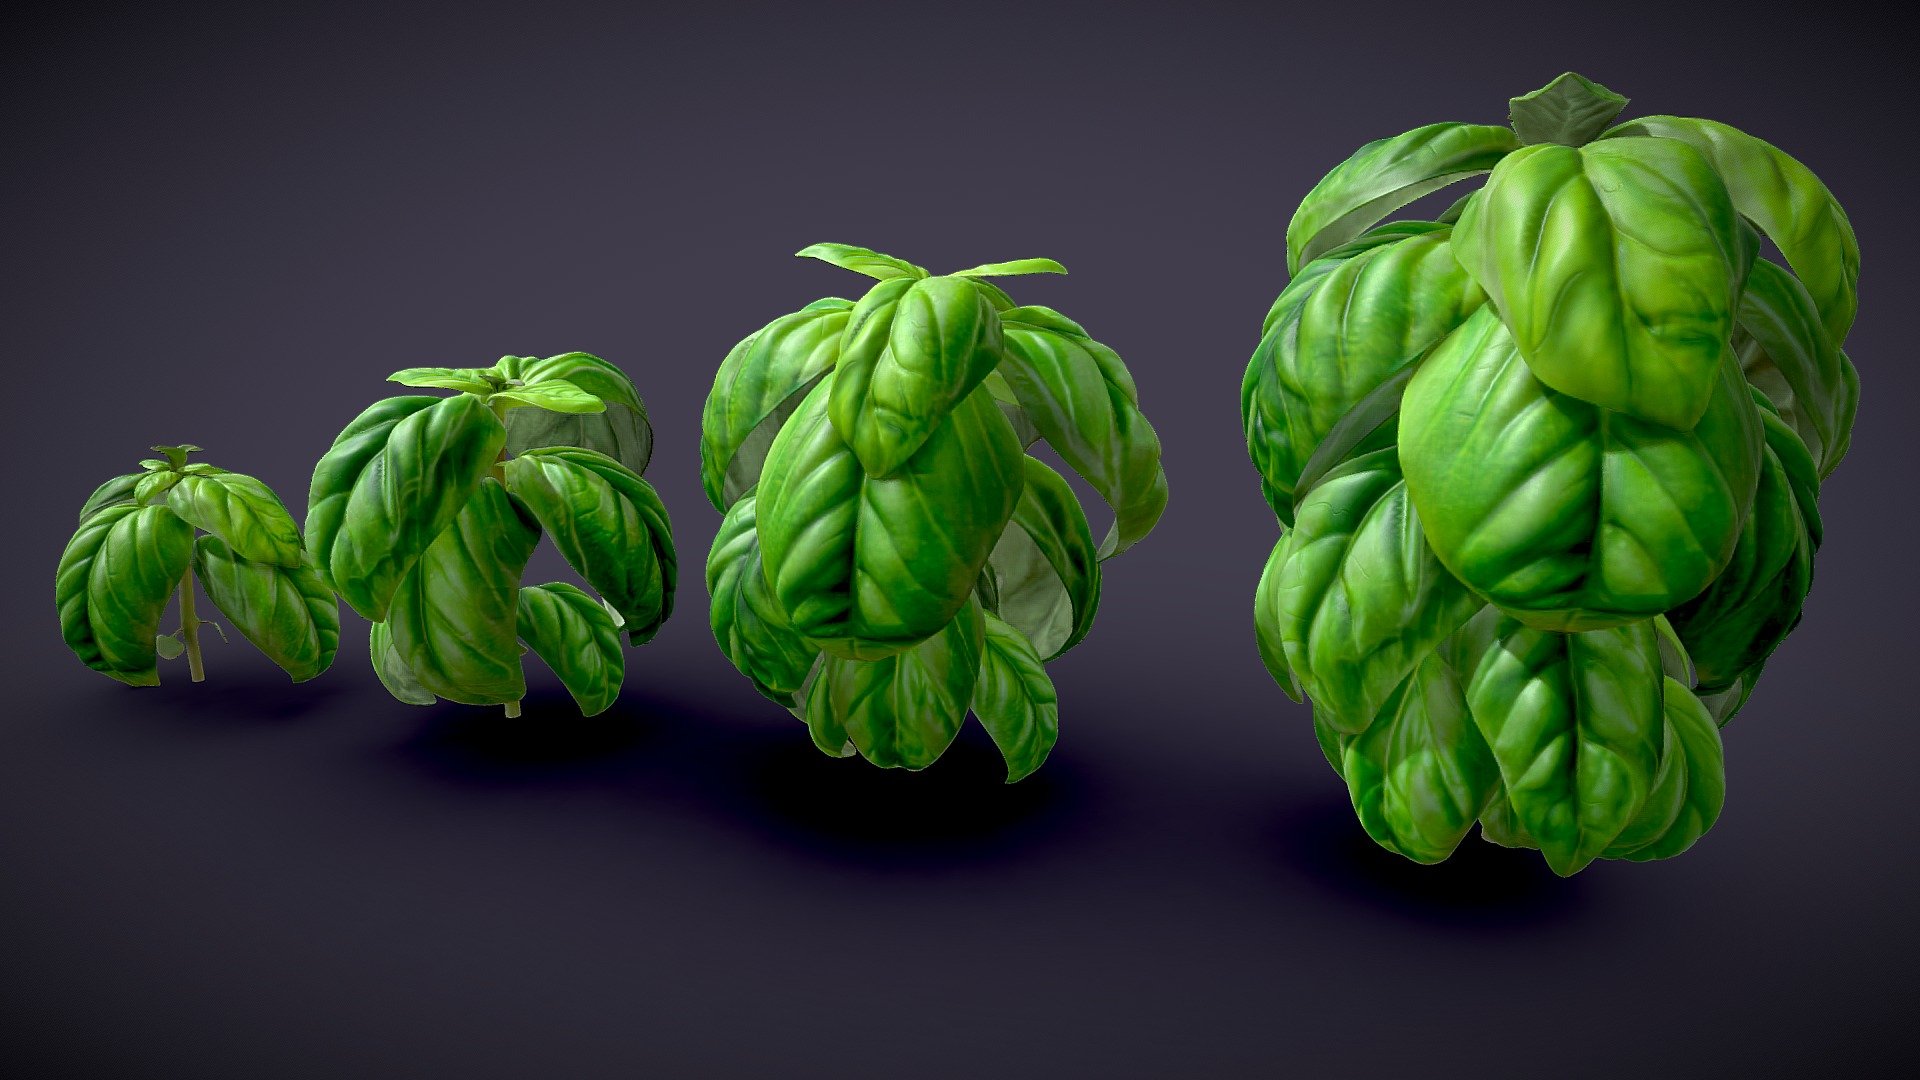 Fantastic Basil_Herb.

Zbrush &amp; 3d Max Modeling.

total 154,405 Verts.

painting and sculpting on the photo 3d model